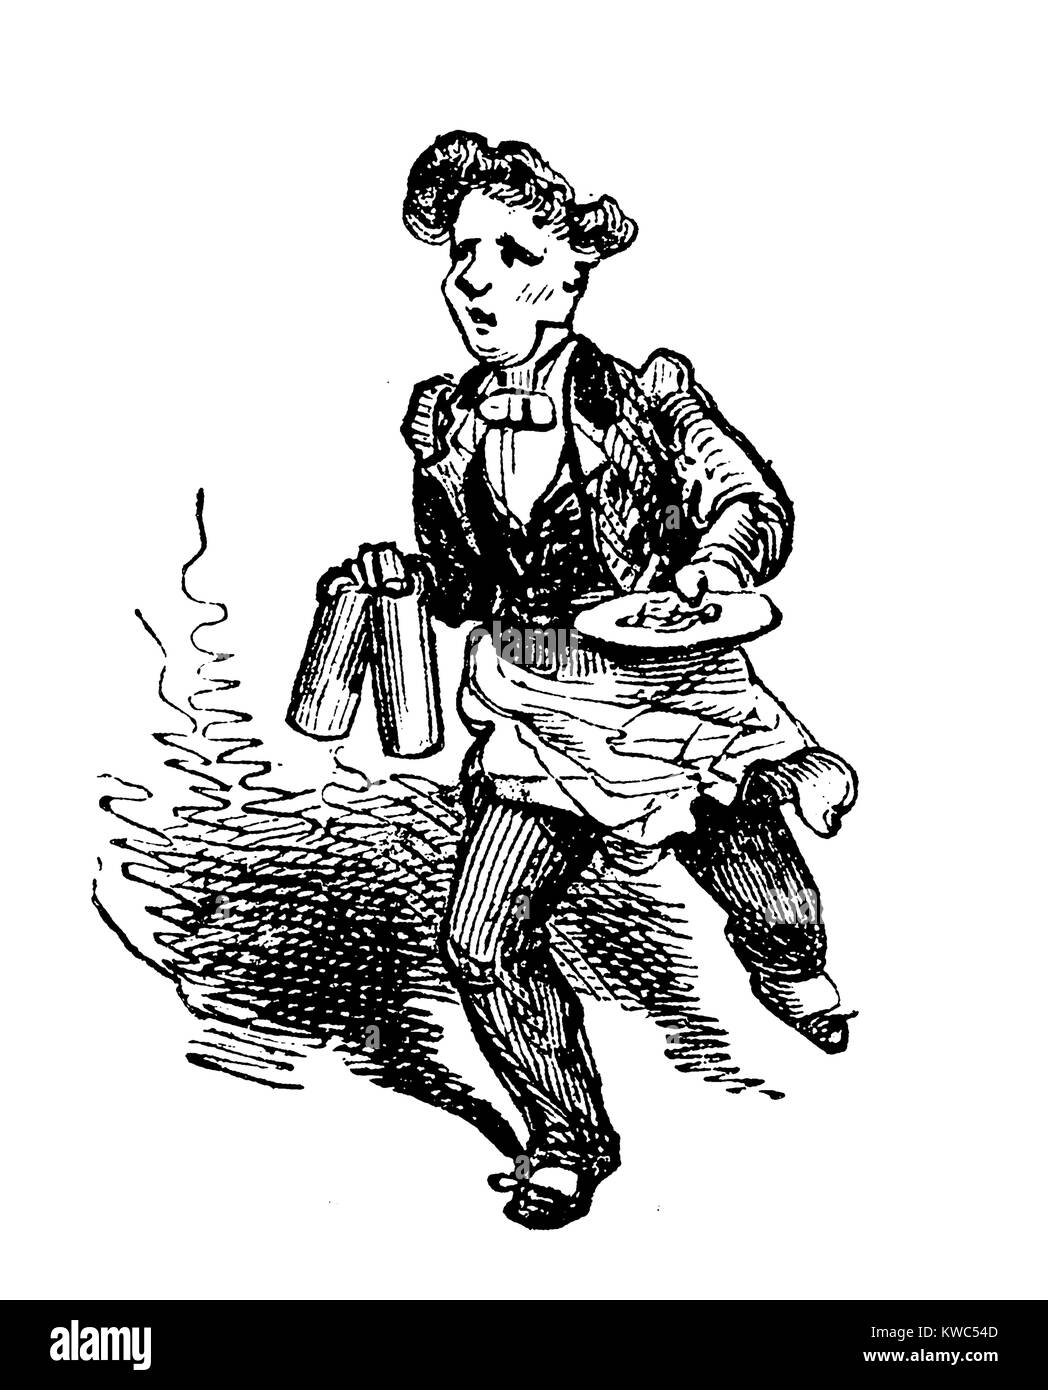 Vintage caricature of waiter running with two mugs and a plate Stock Photo